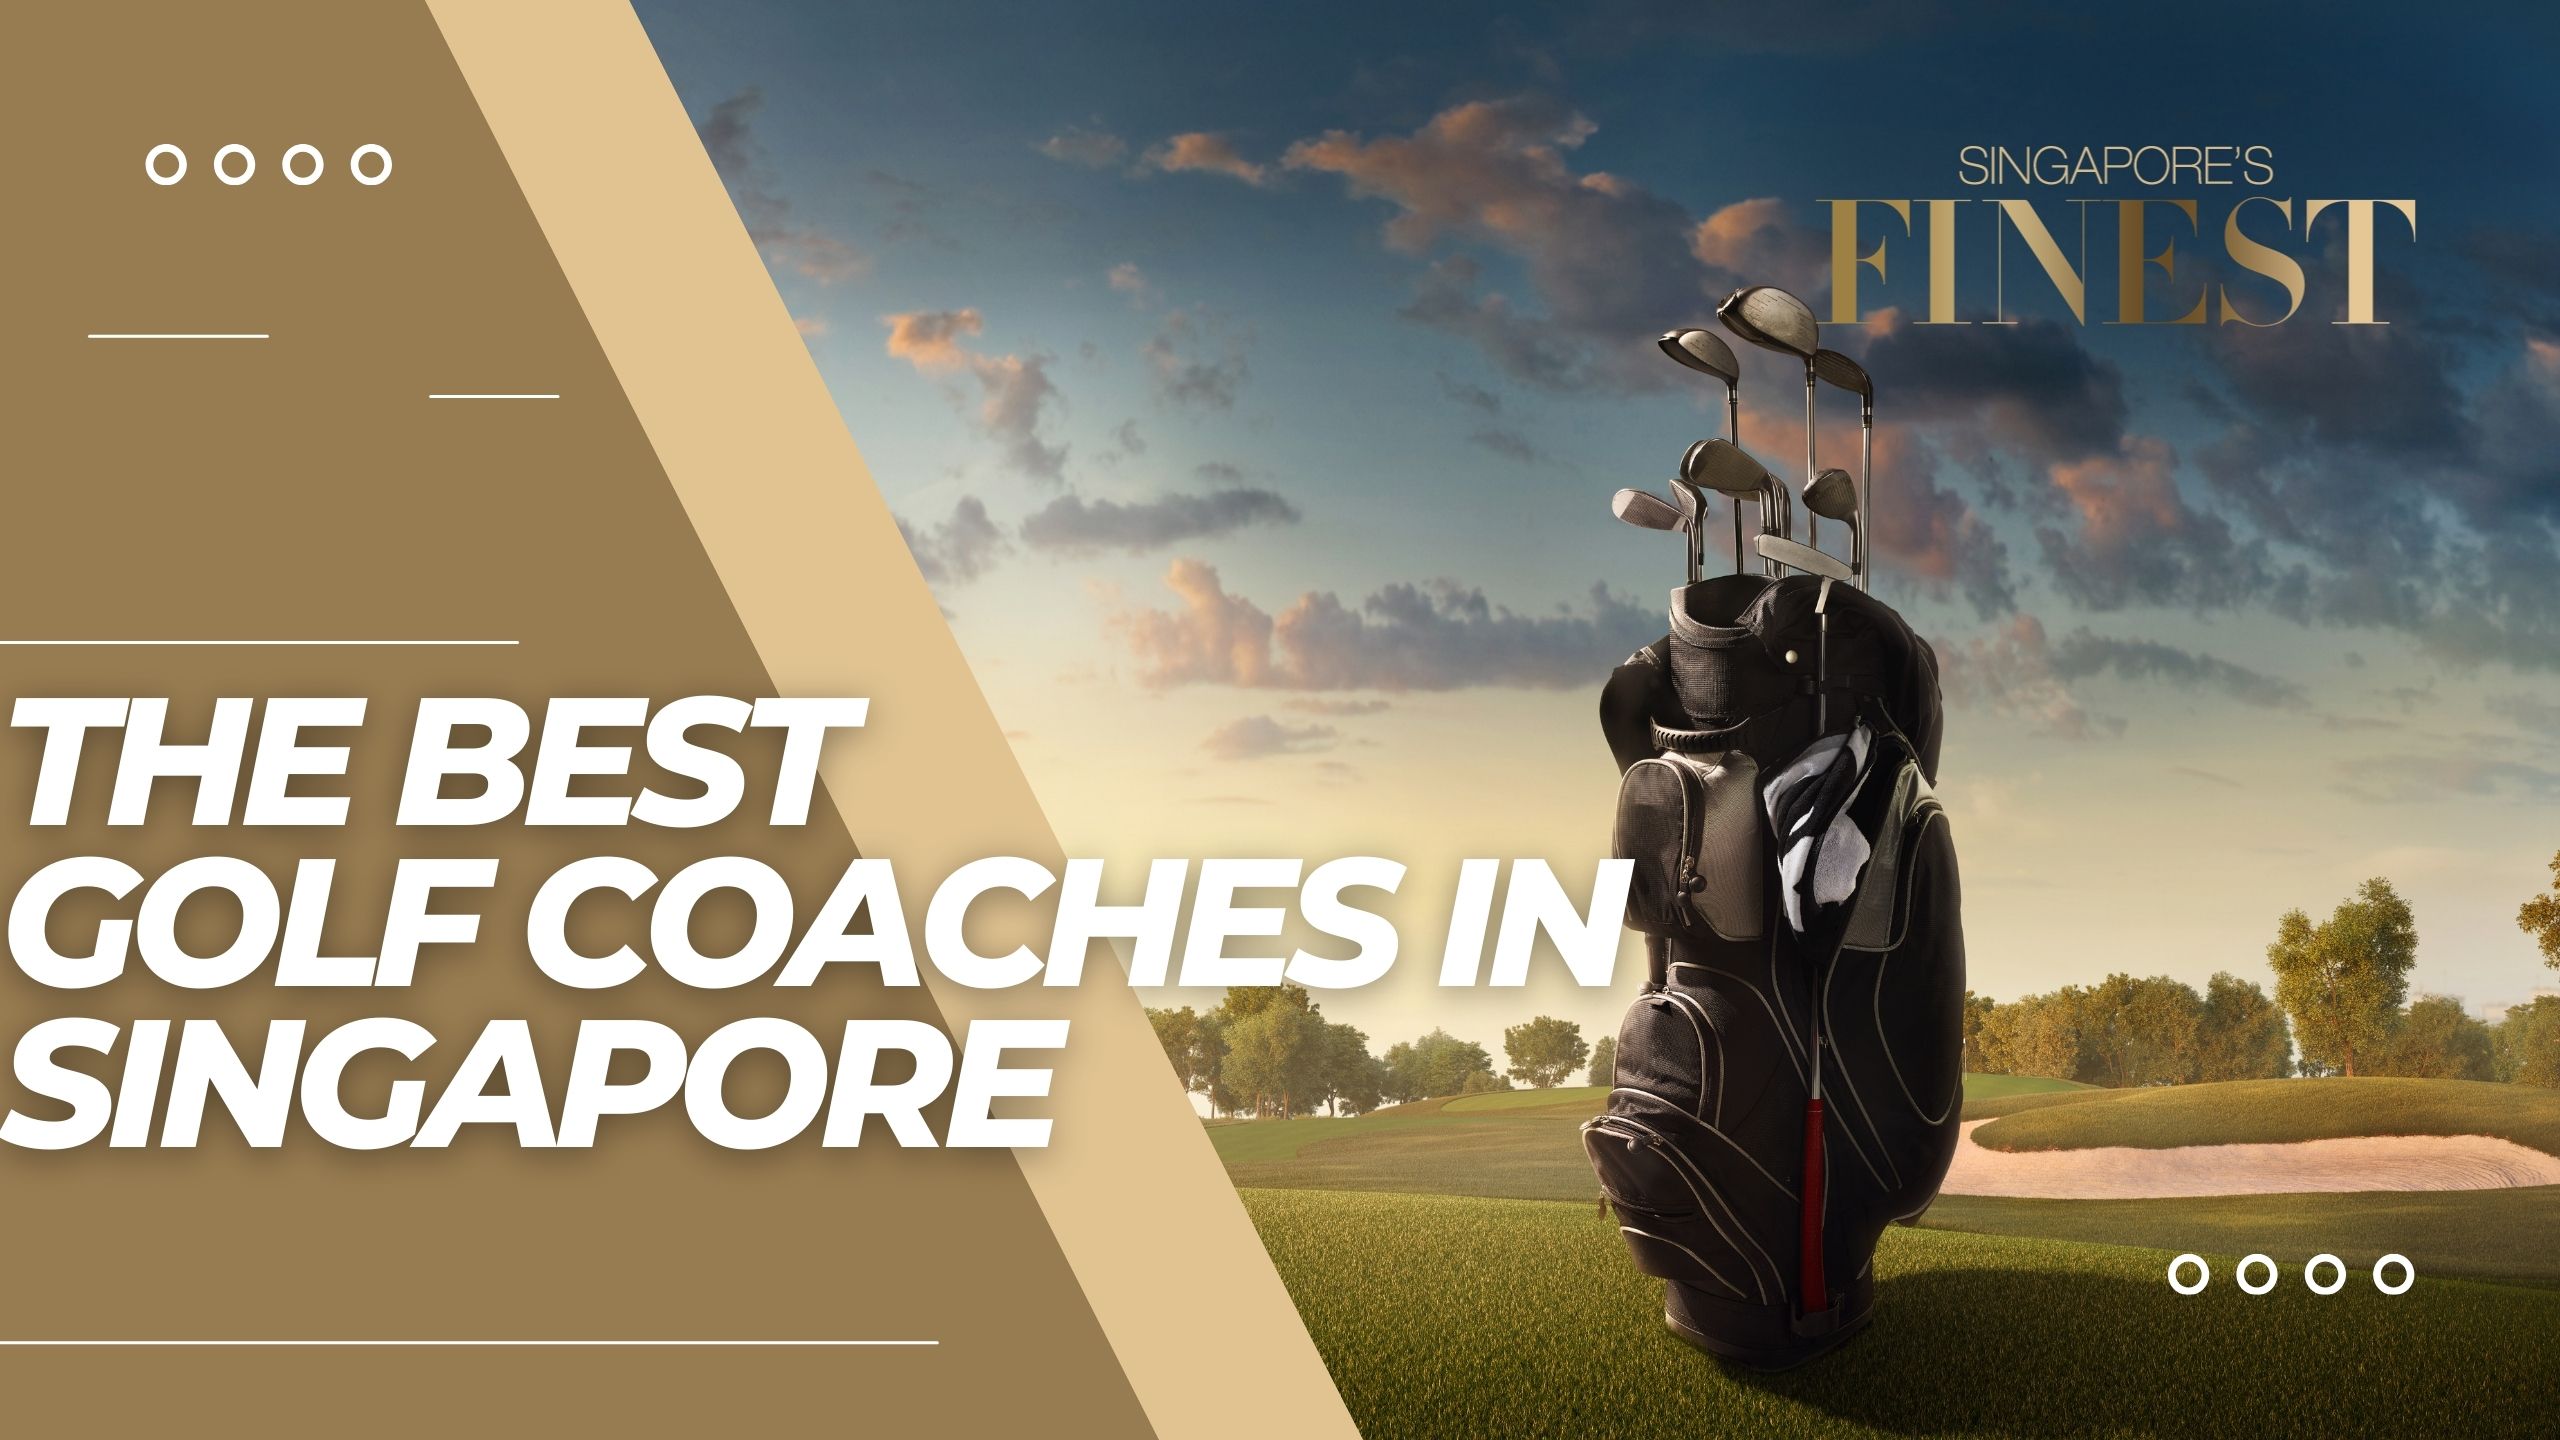 The Finest Golf Coaches in Singapore